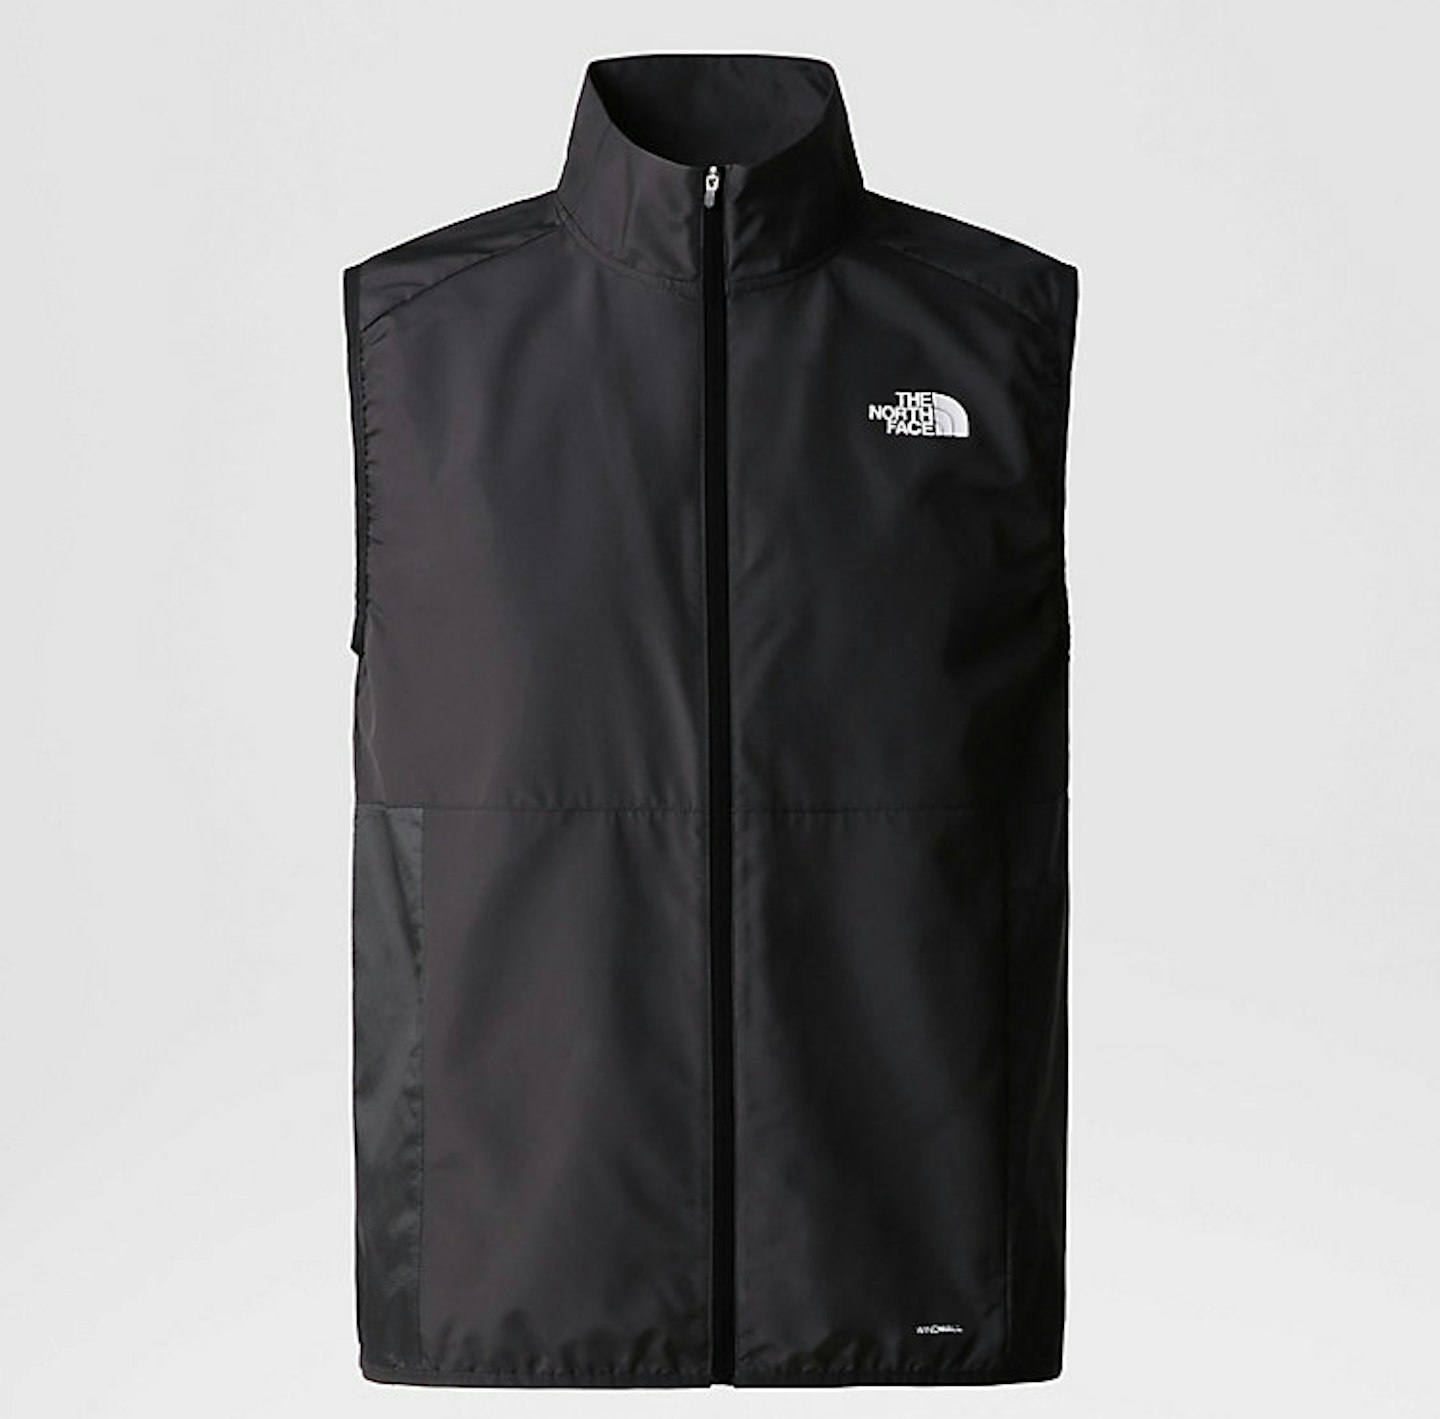 The North Face combat gilet